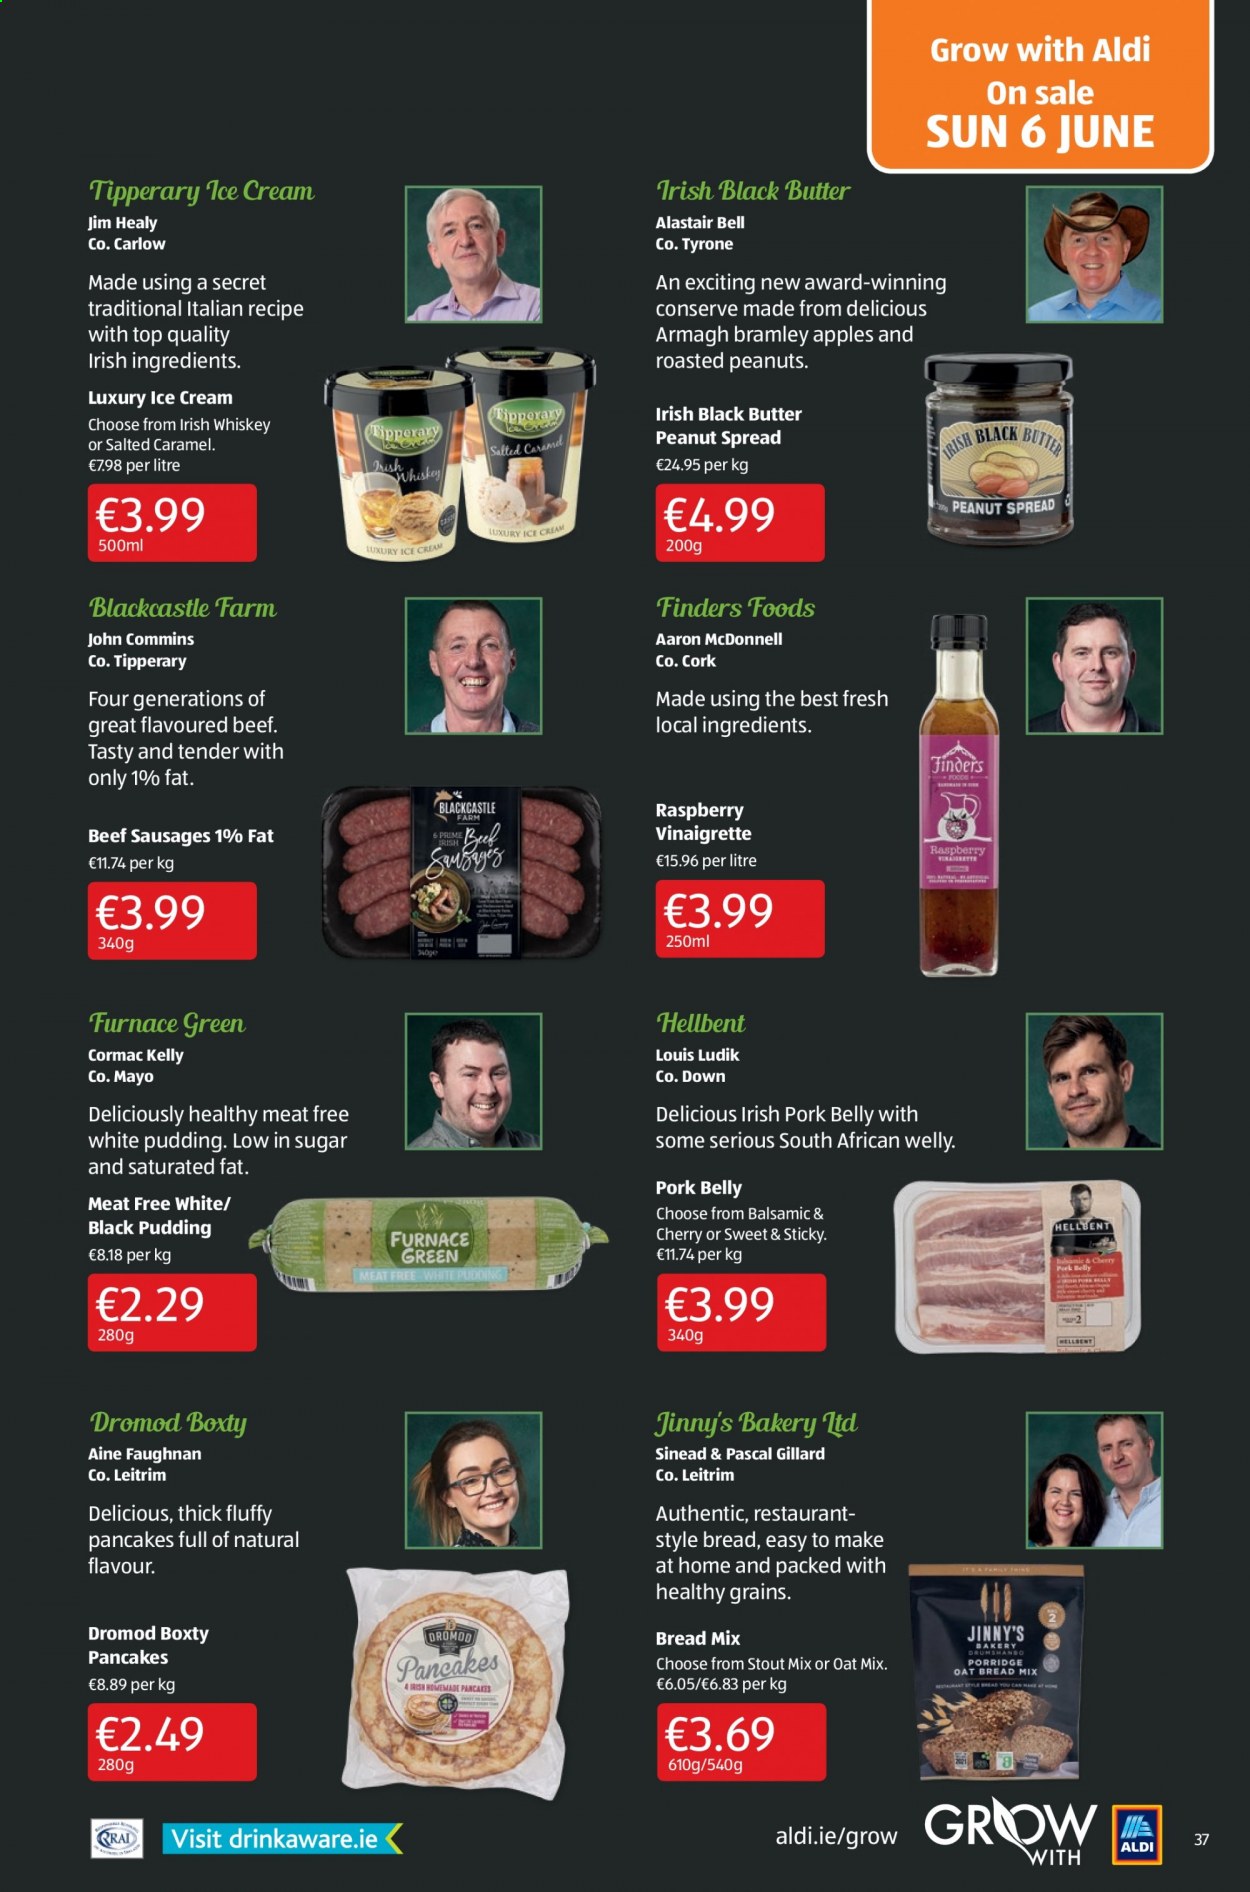 thumbnail - Aldi offer  - 03.06.2021 - 09.06.2021 - Sales products - cherries, pancakes, black pudding, sausage, beef sausage, butter, mayonnaise, ice cream, vinaigrette dressing, roasted peanuts, peanuts, whiskey, irish whiskey, whisky, pork belly, pork meat. Page 37.